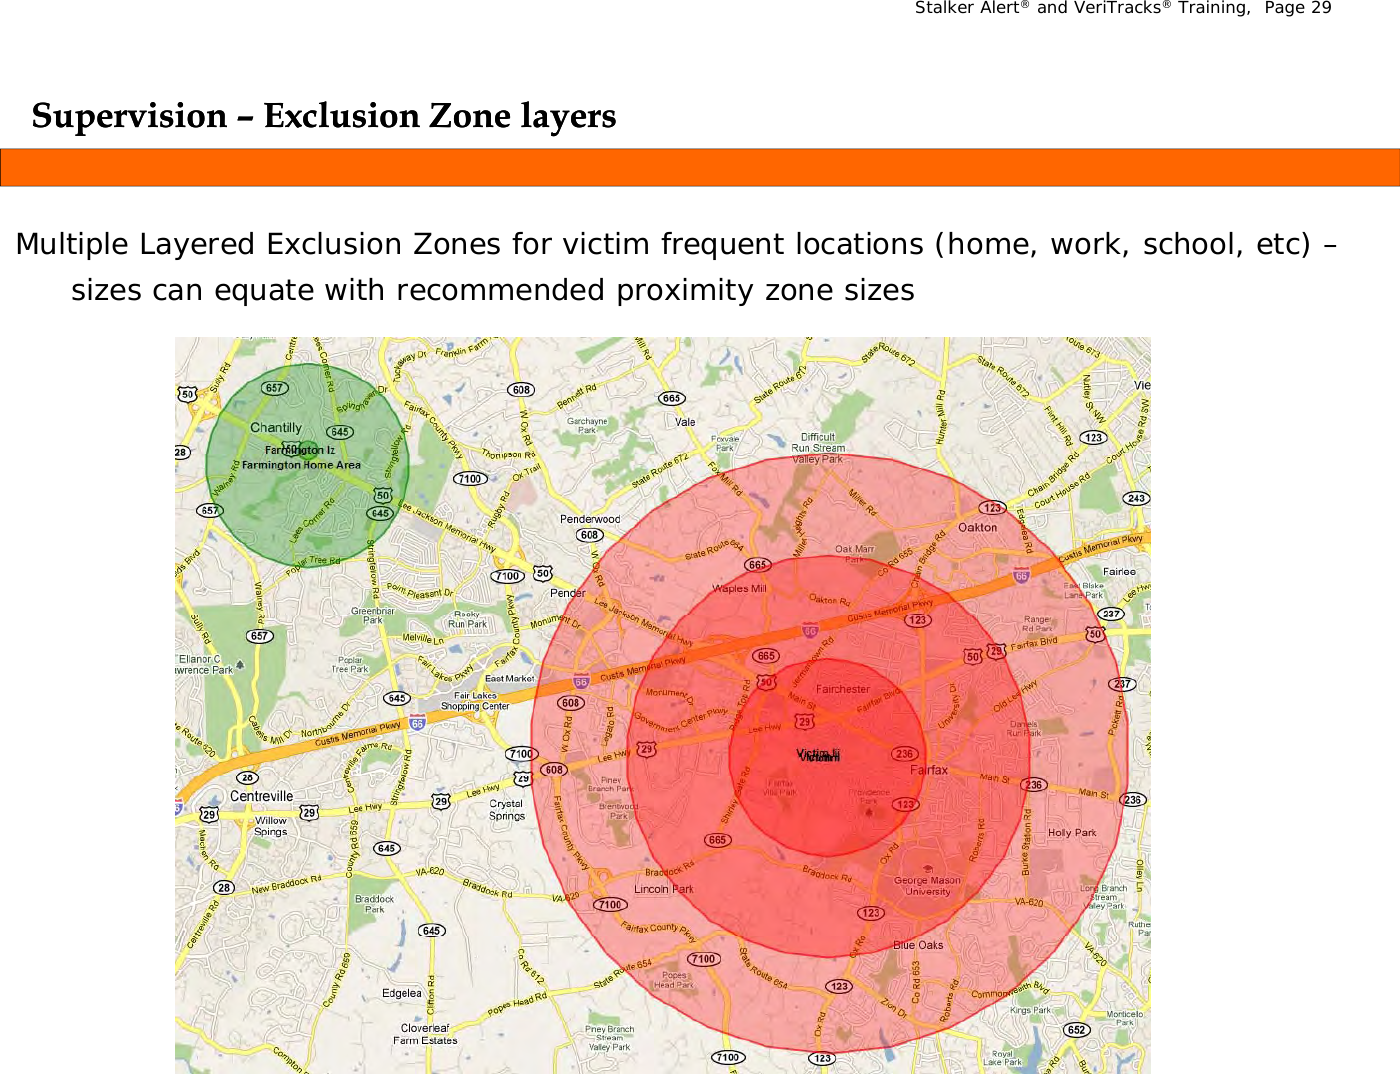 Stalker Alert®and VeriTracks®Training,  Page 29Supervision Supervision –– Exclusion Zone layersExclusion Zone layersppyyMultiple Layered Exclusion Zones for victim frequent locations (home, work, school, etc) –sizes can equate with recommended proximity zone sizes sizes can equate with recommended proximity zone sizes 